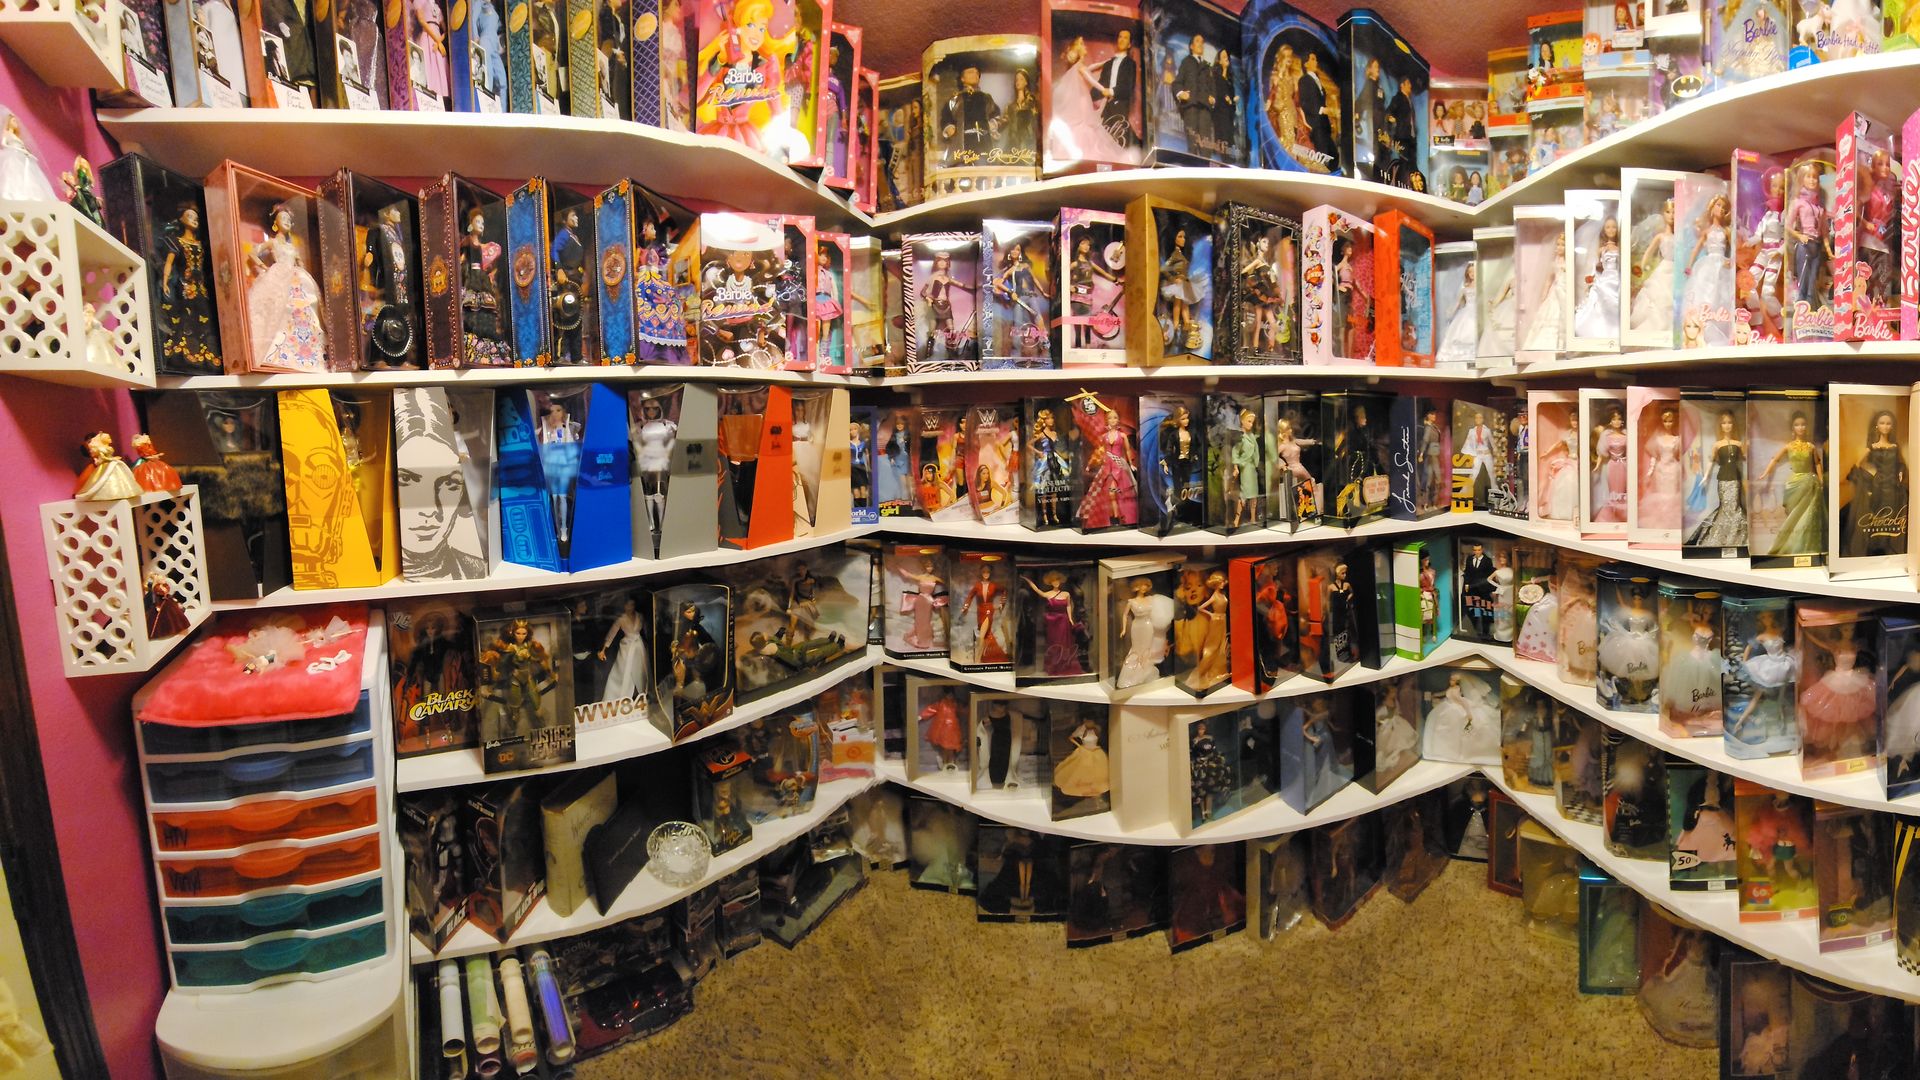 A photo of a Barbie doll collection.